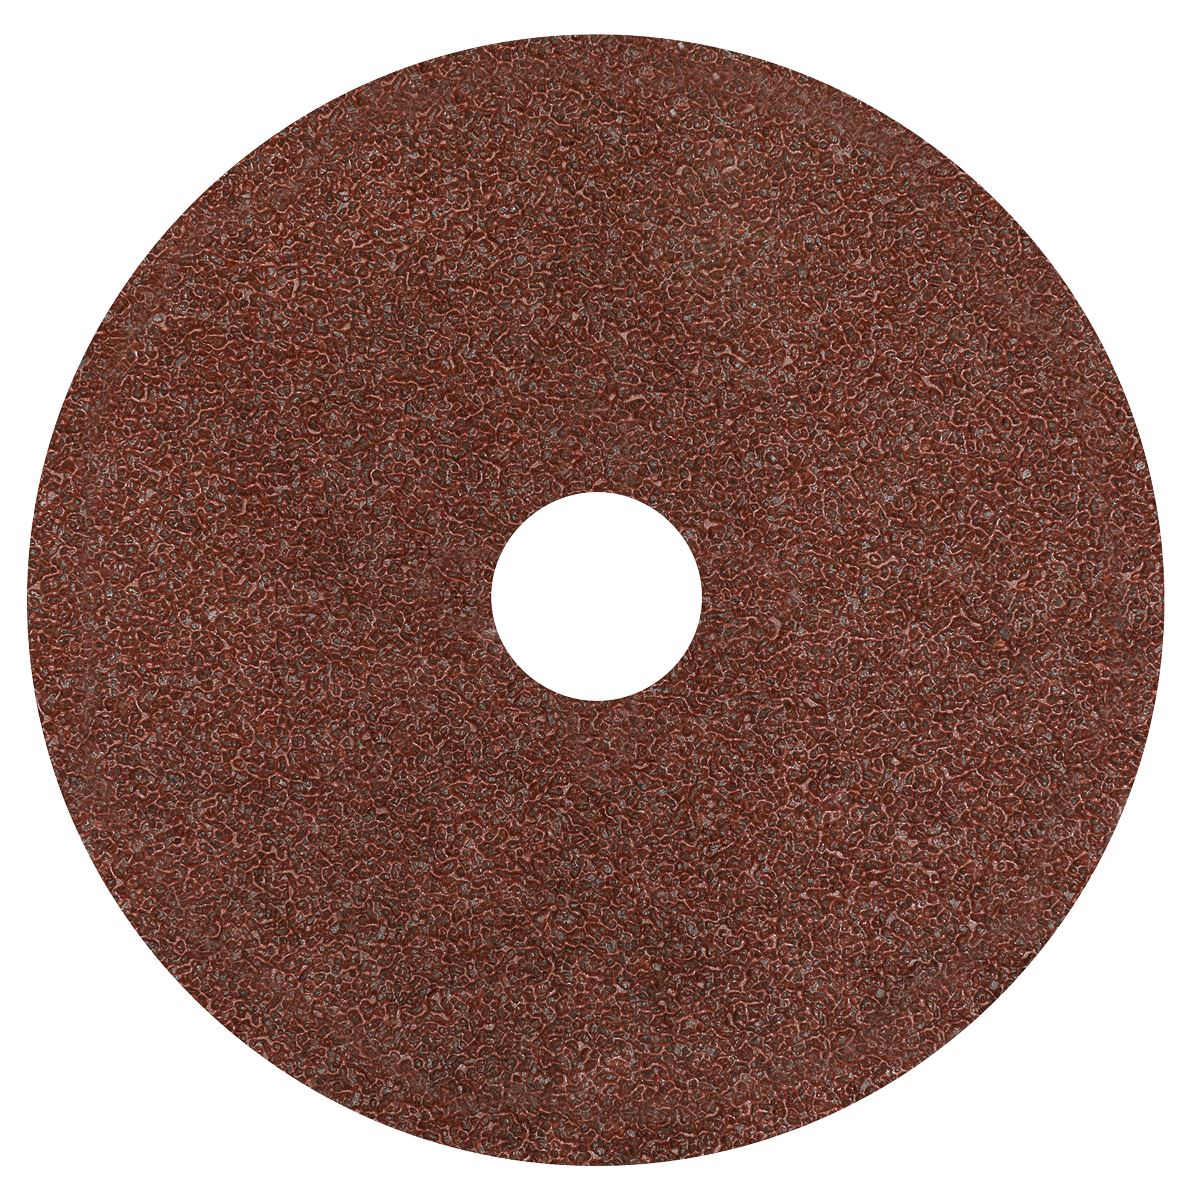 Worksafe by Sealey Fibre Backed Disc Ø125mm - 24Grit Pack of 25